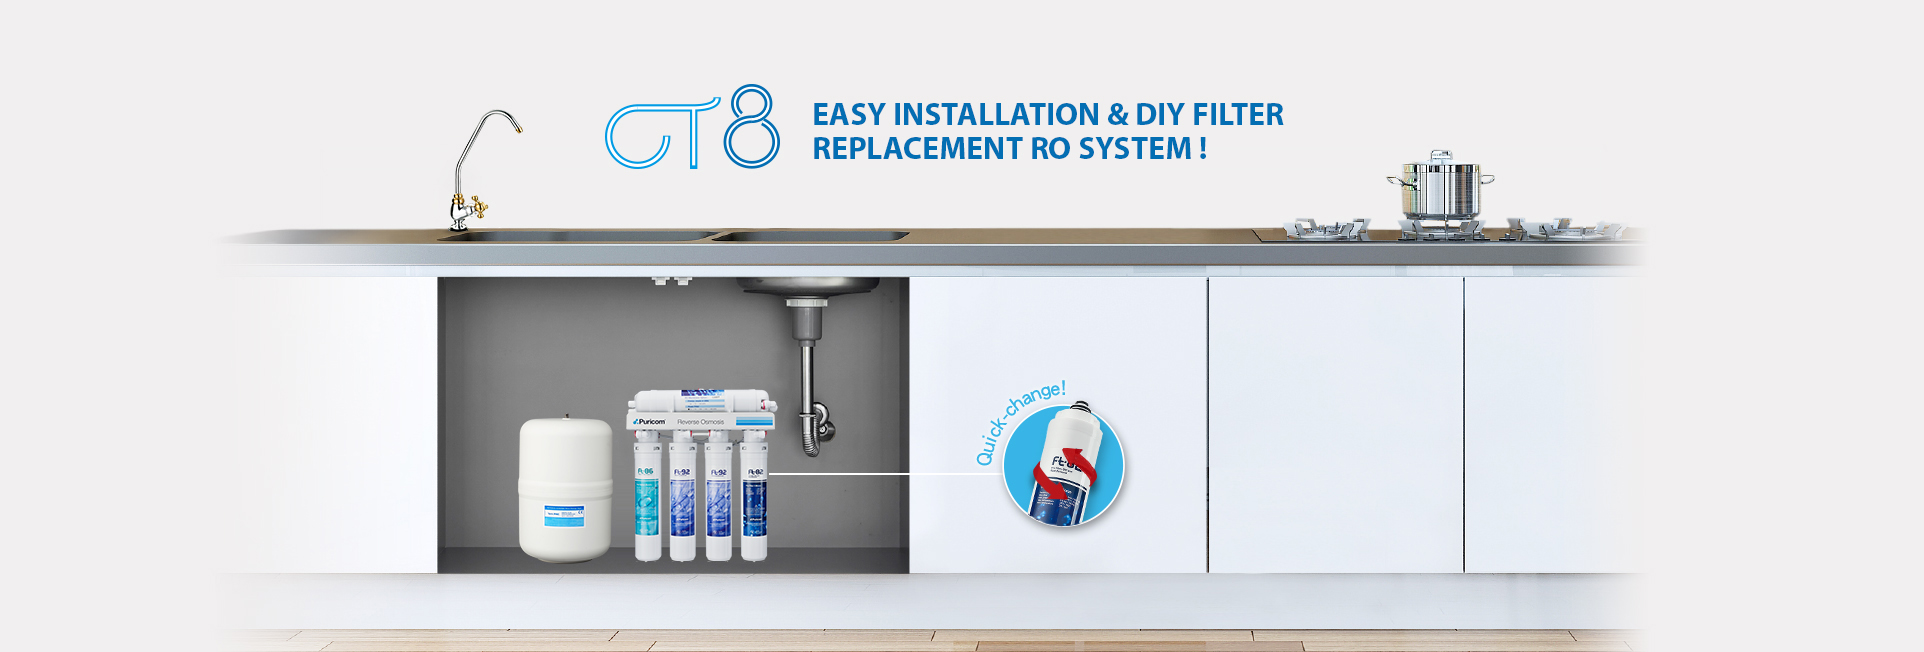 CT8-R3 Traditional RO Filtration System - Puricom